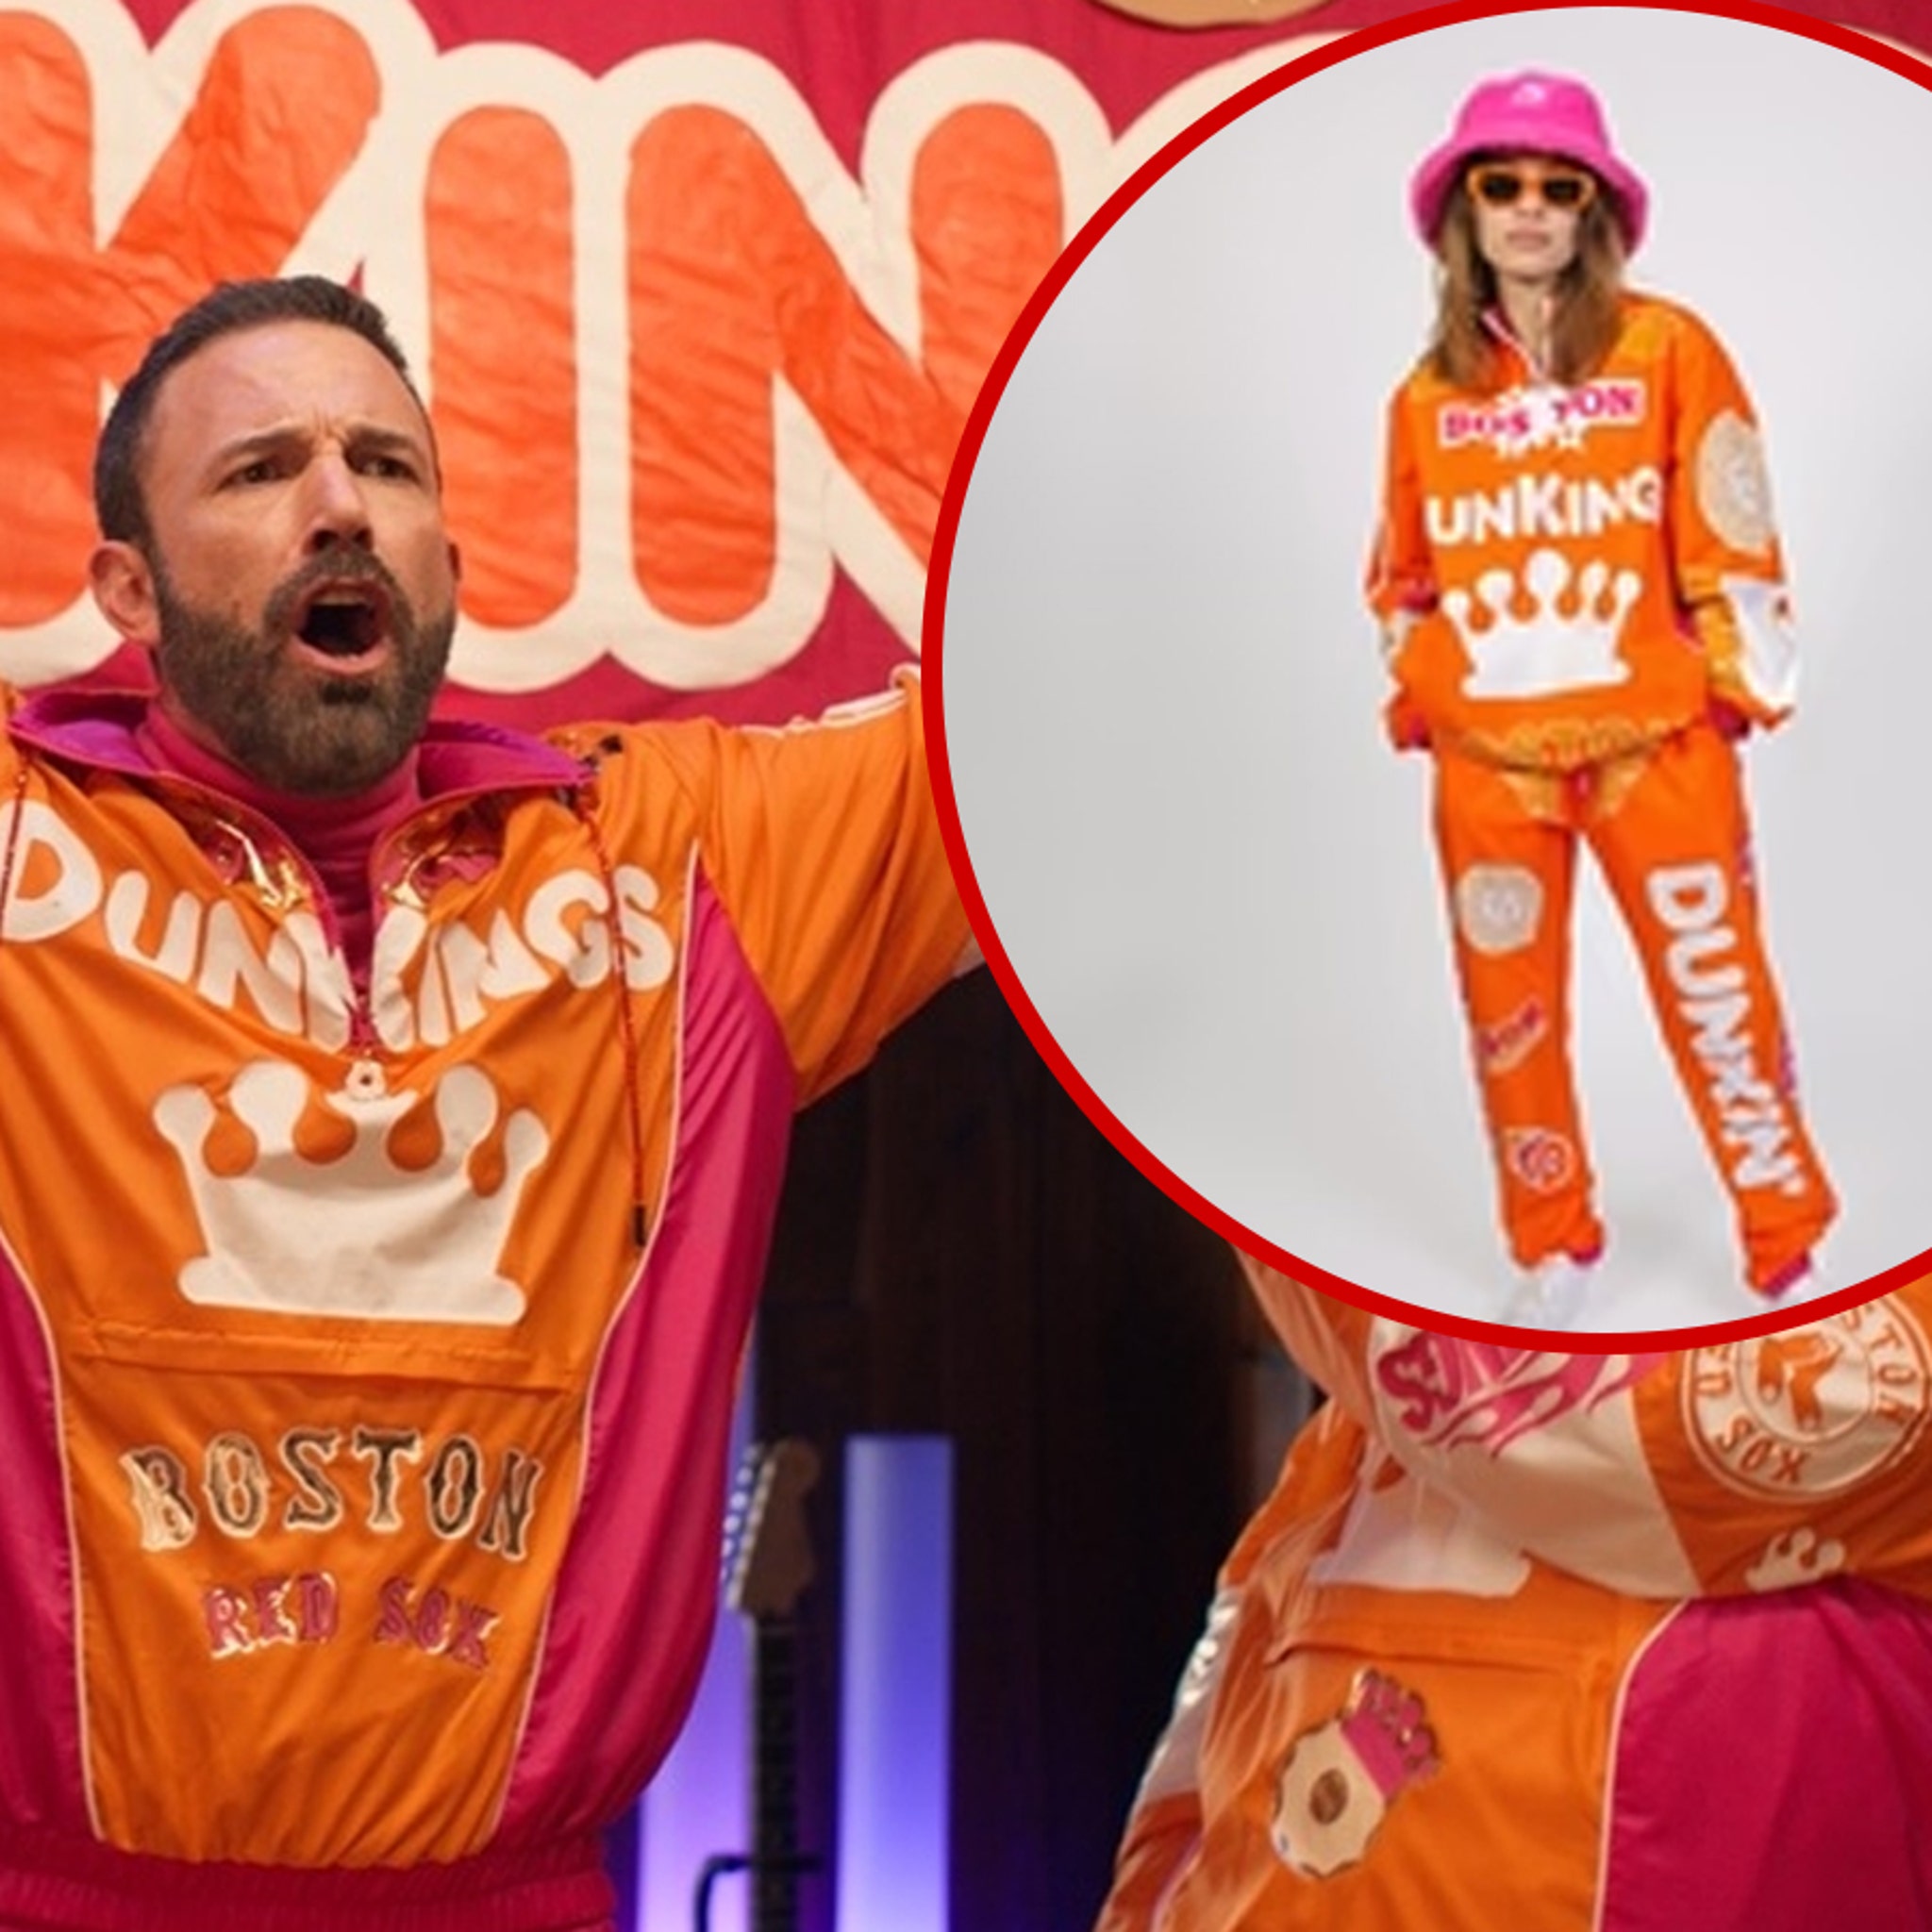 Dunkin' Tracksuits Sold Out In 19 Minutes After Ben Affleck Super Bowl Ad | Dunkings Track Jacket